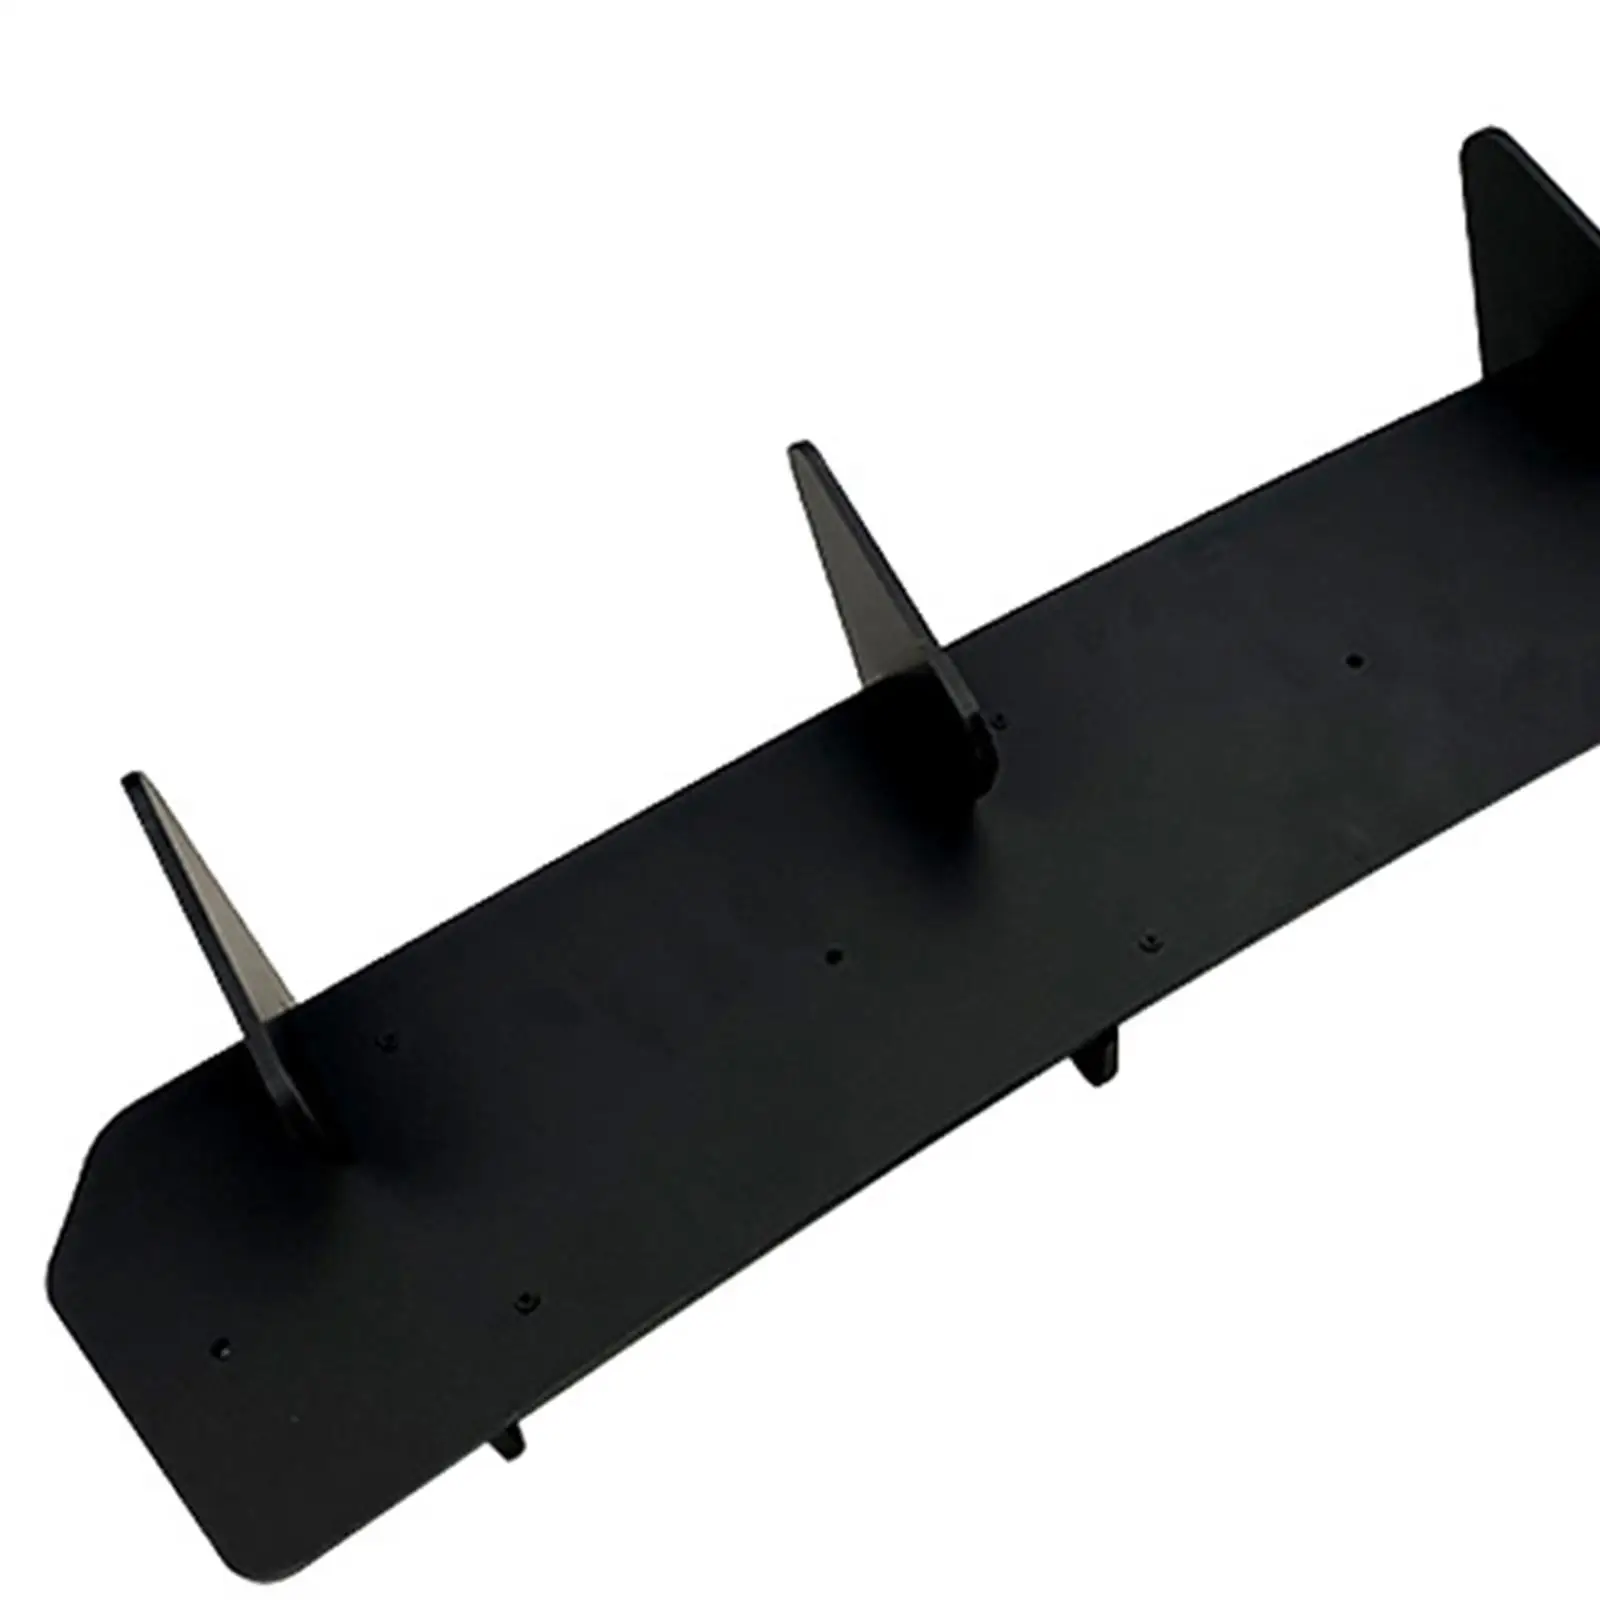 Automotive Rear Bumper Diffuser Spoiler with Side splitters for VW Golf MK7.5 GTI Professional ABS Material Accessory